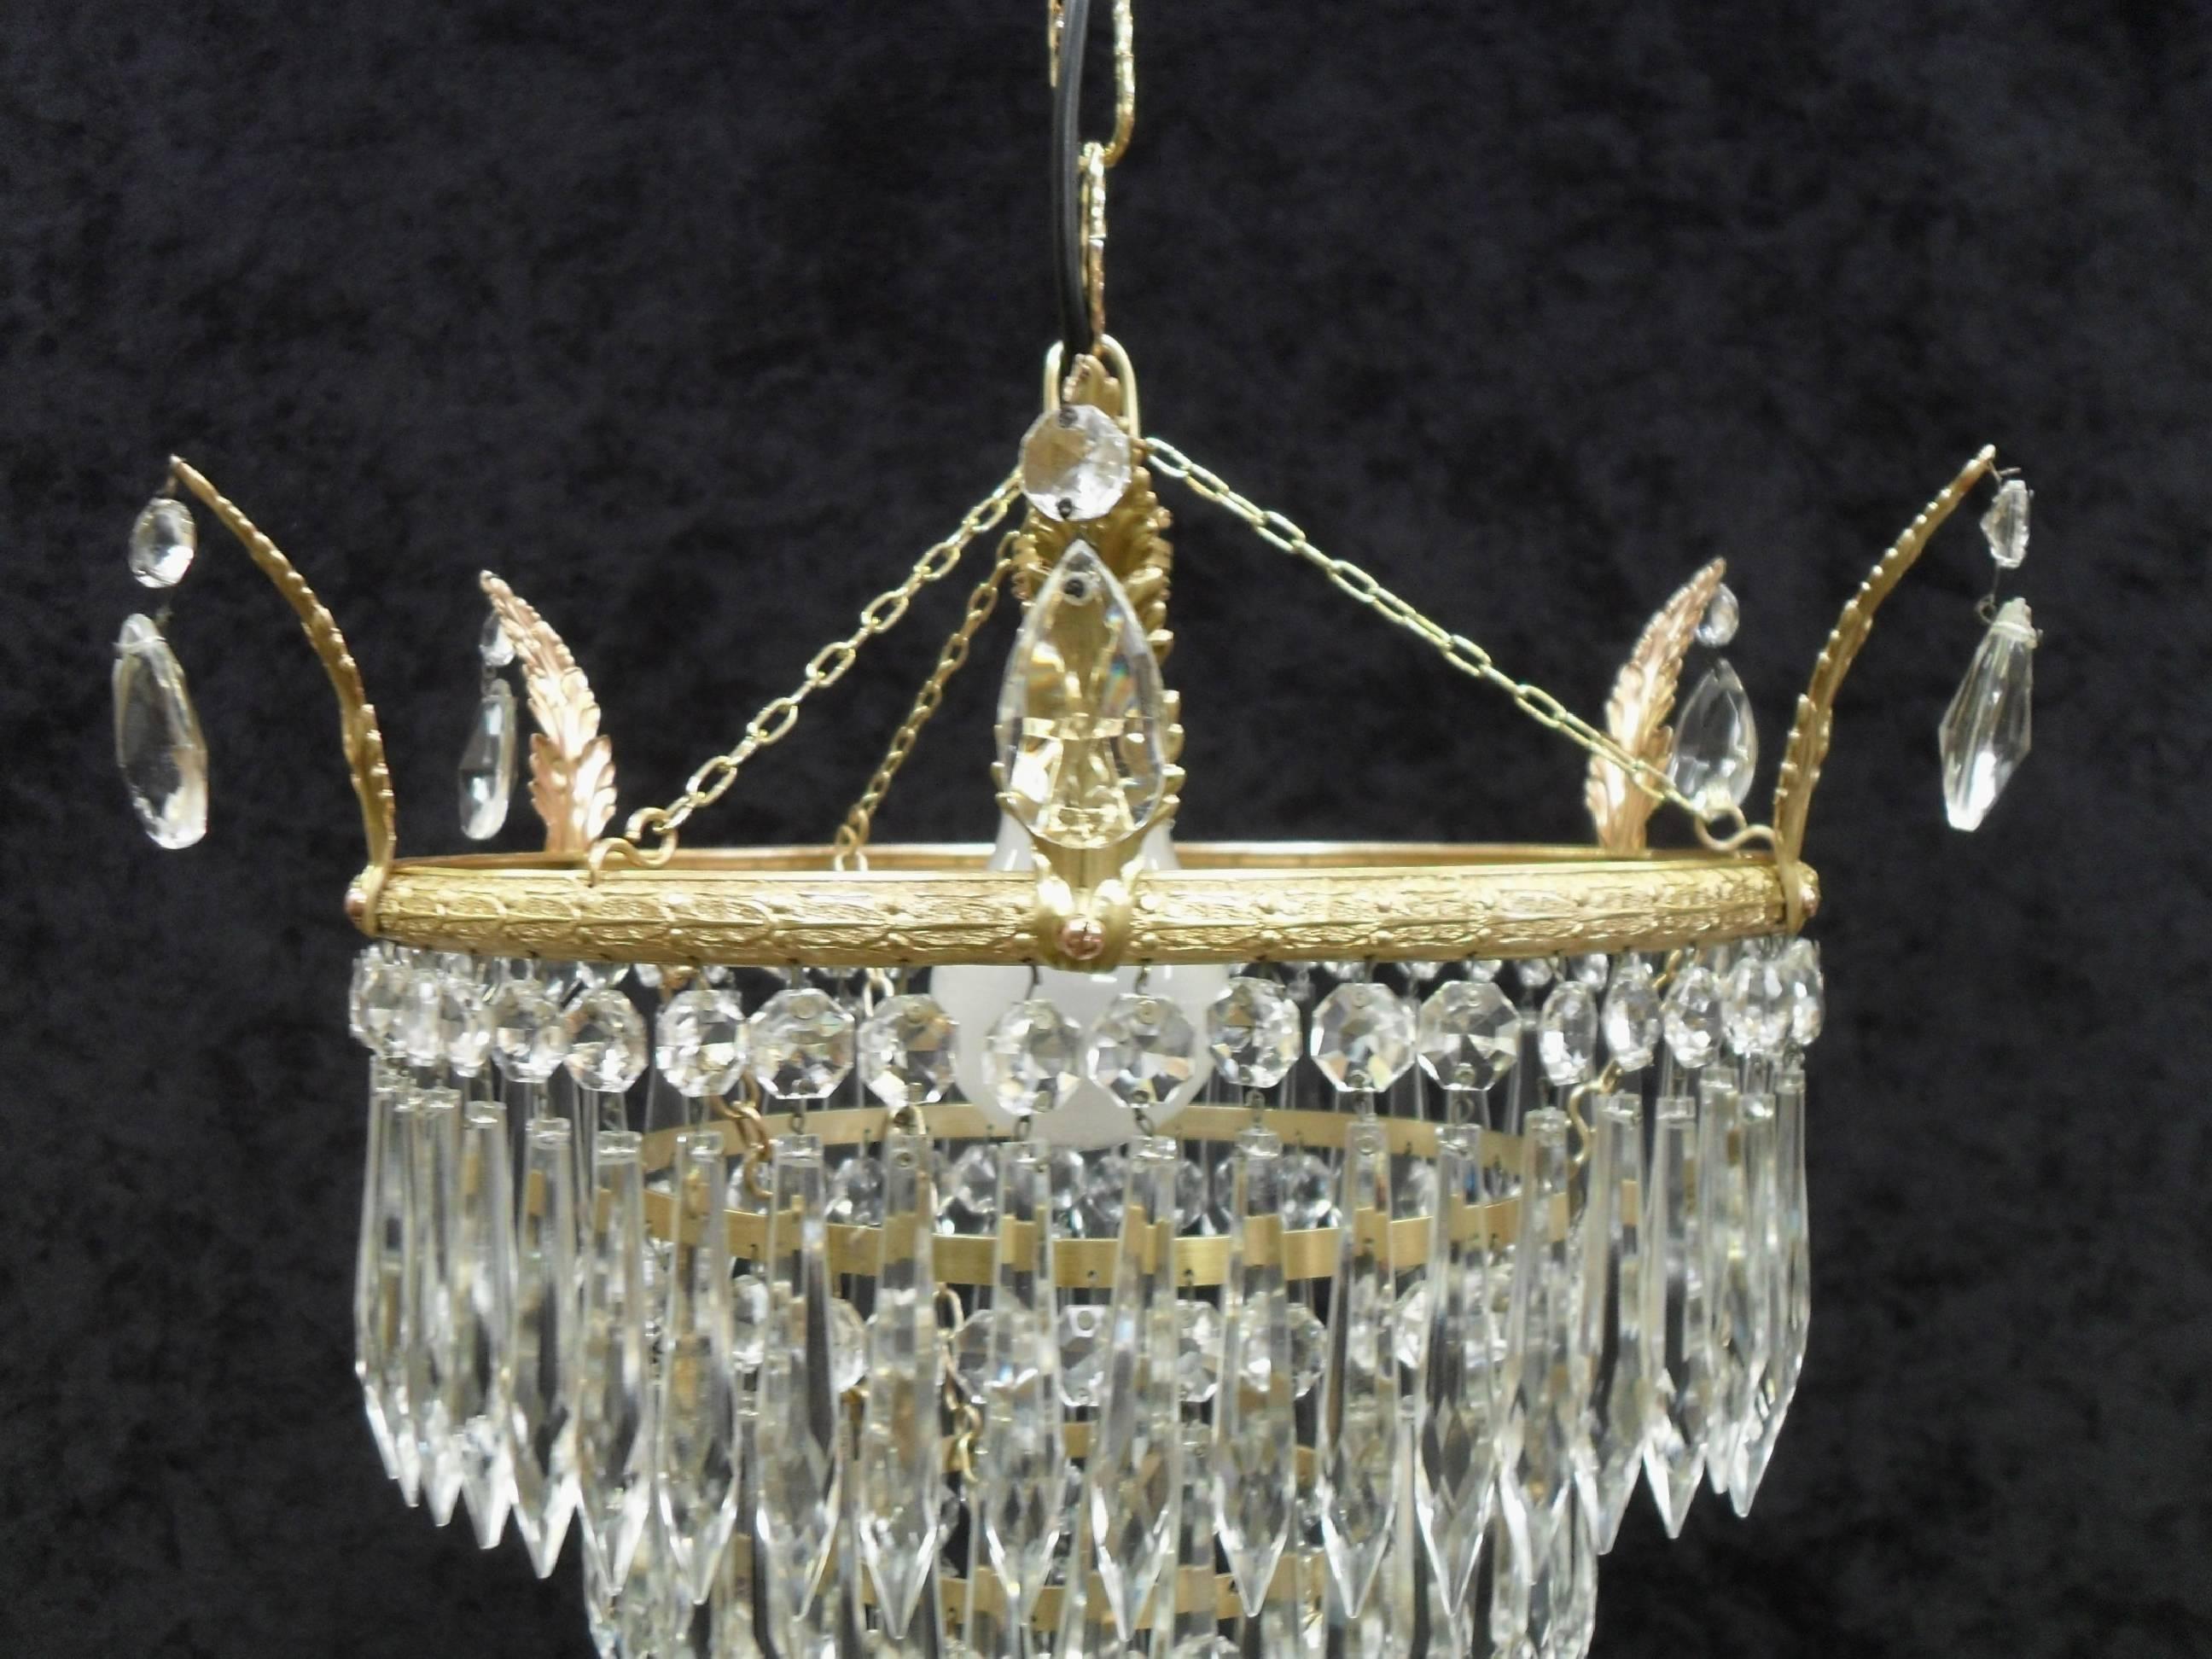 A very good quality Italian Art Deco four tier chandelier light with glass droplets and decorative brass frame with hanging leaves on a chain. The brass has been cleaned and lacquered and the light has been rewired and is in full working order.
 